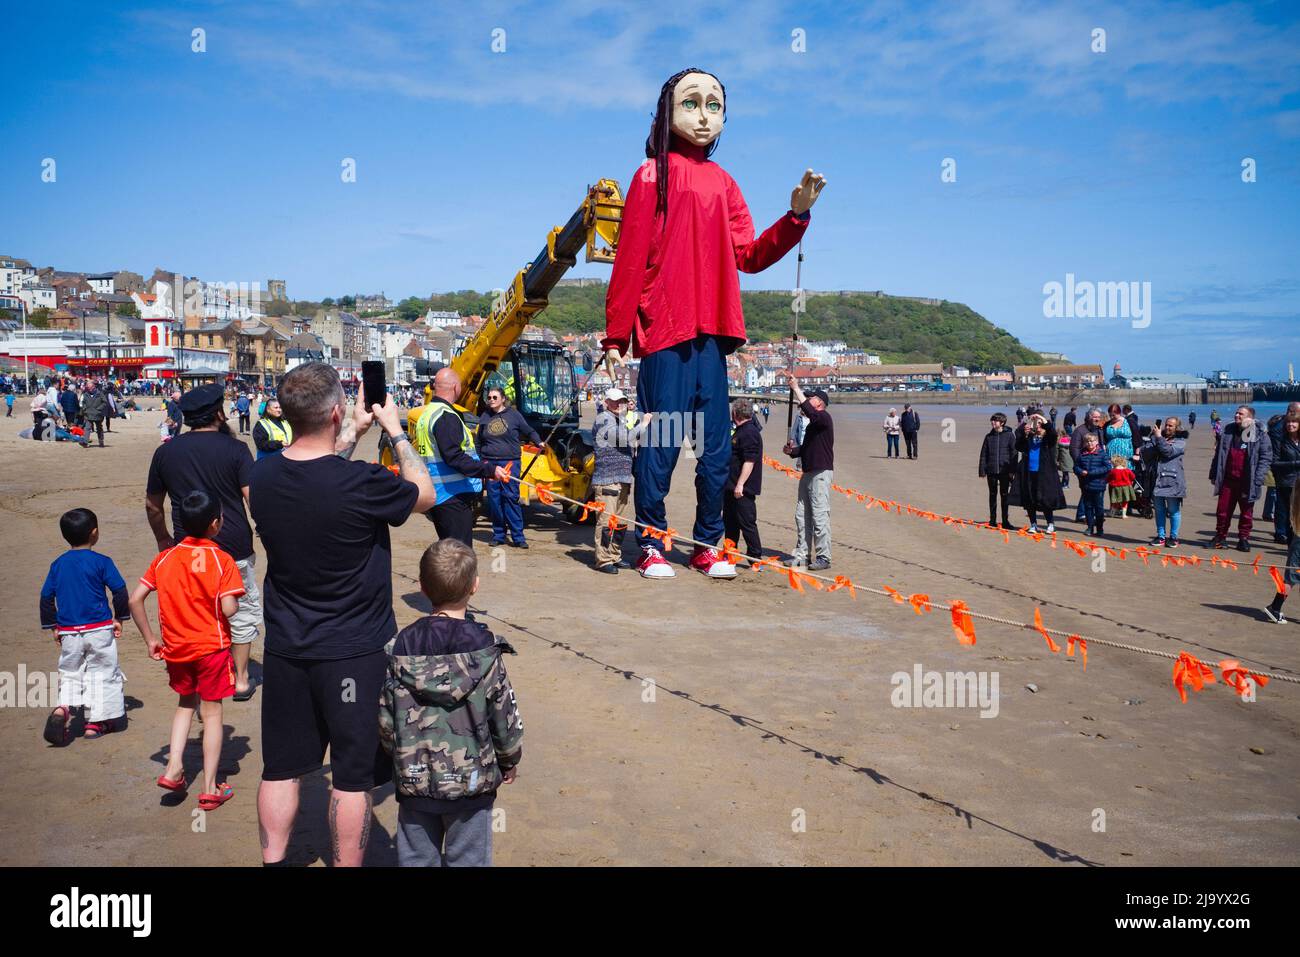 People watching Aura the puppet being operated on Scarborough beach during a performance of the Survivor Stock Photo